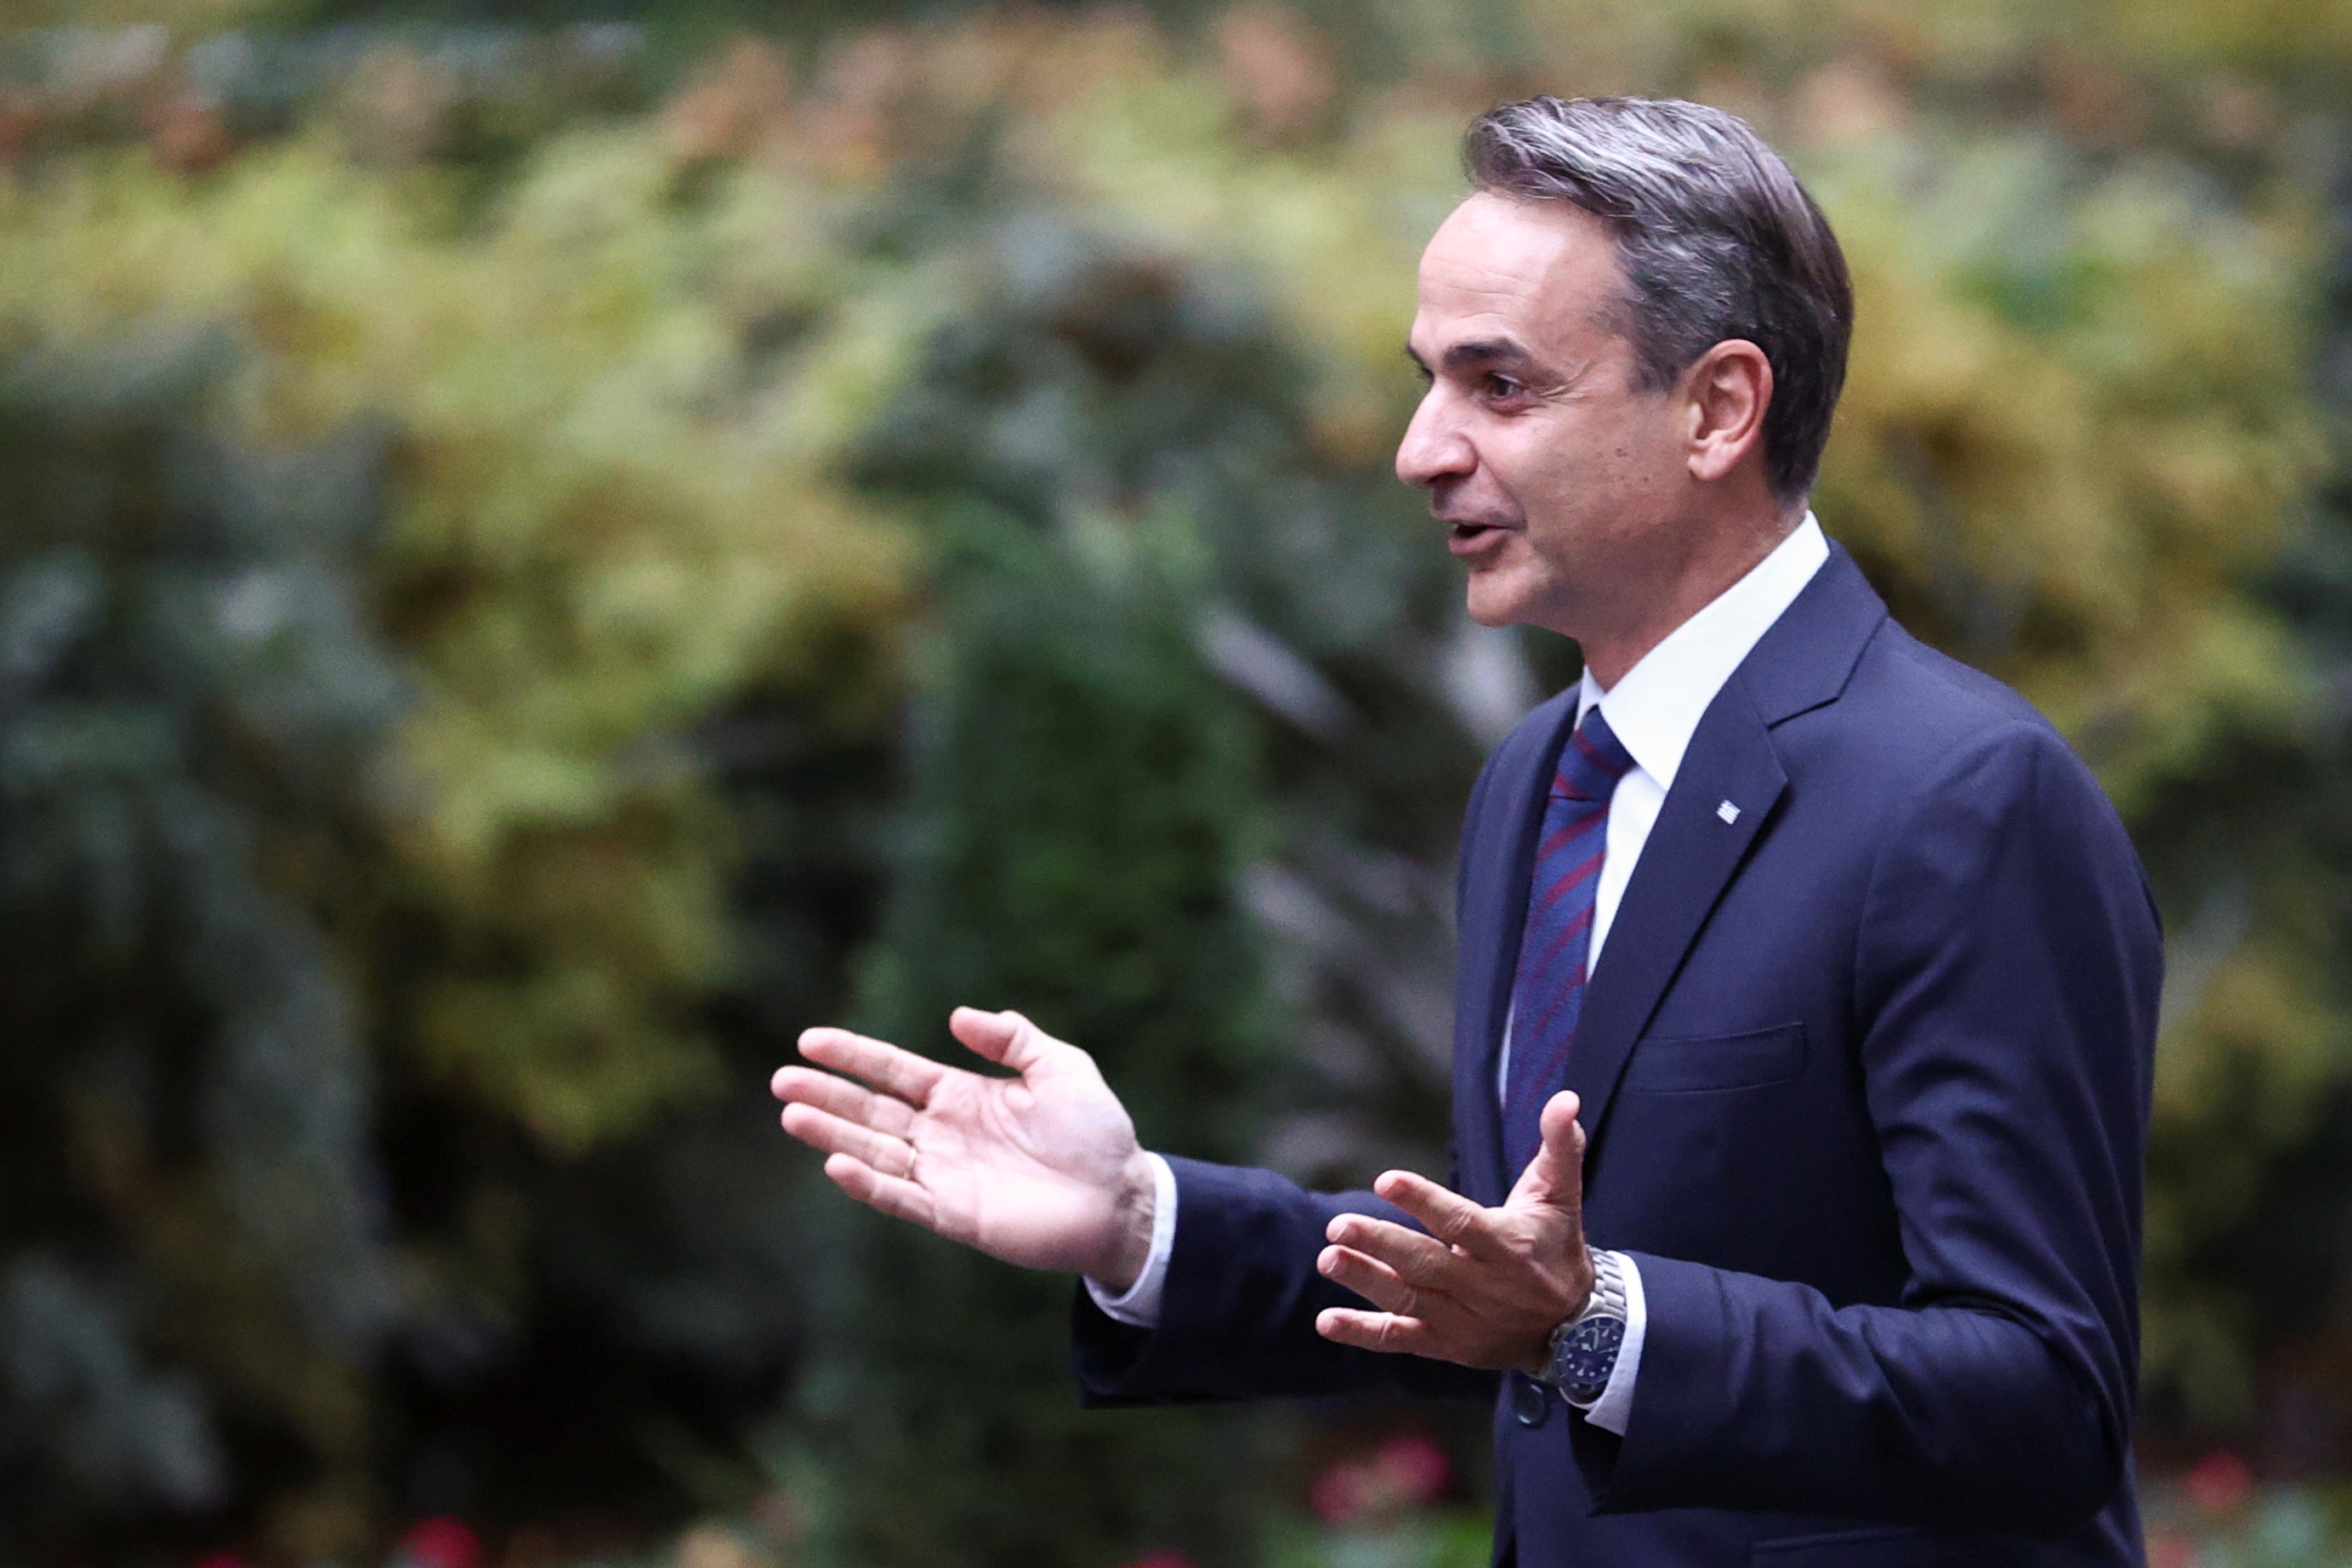 Britain's PM Johnson meets with Greece's PM Mitsotakis in London